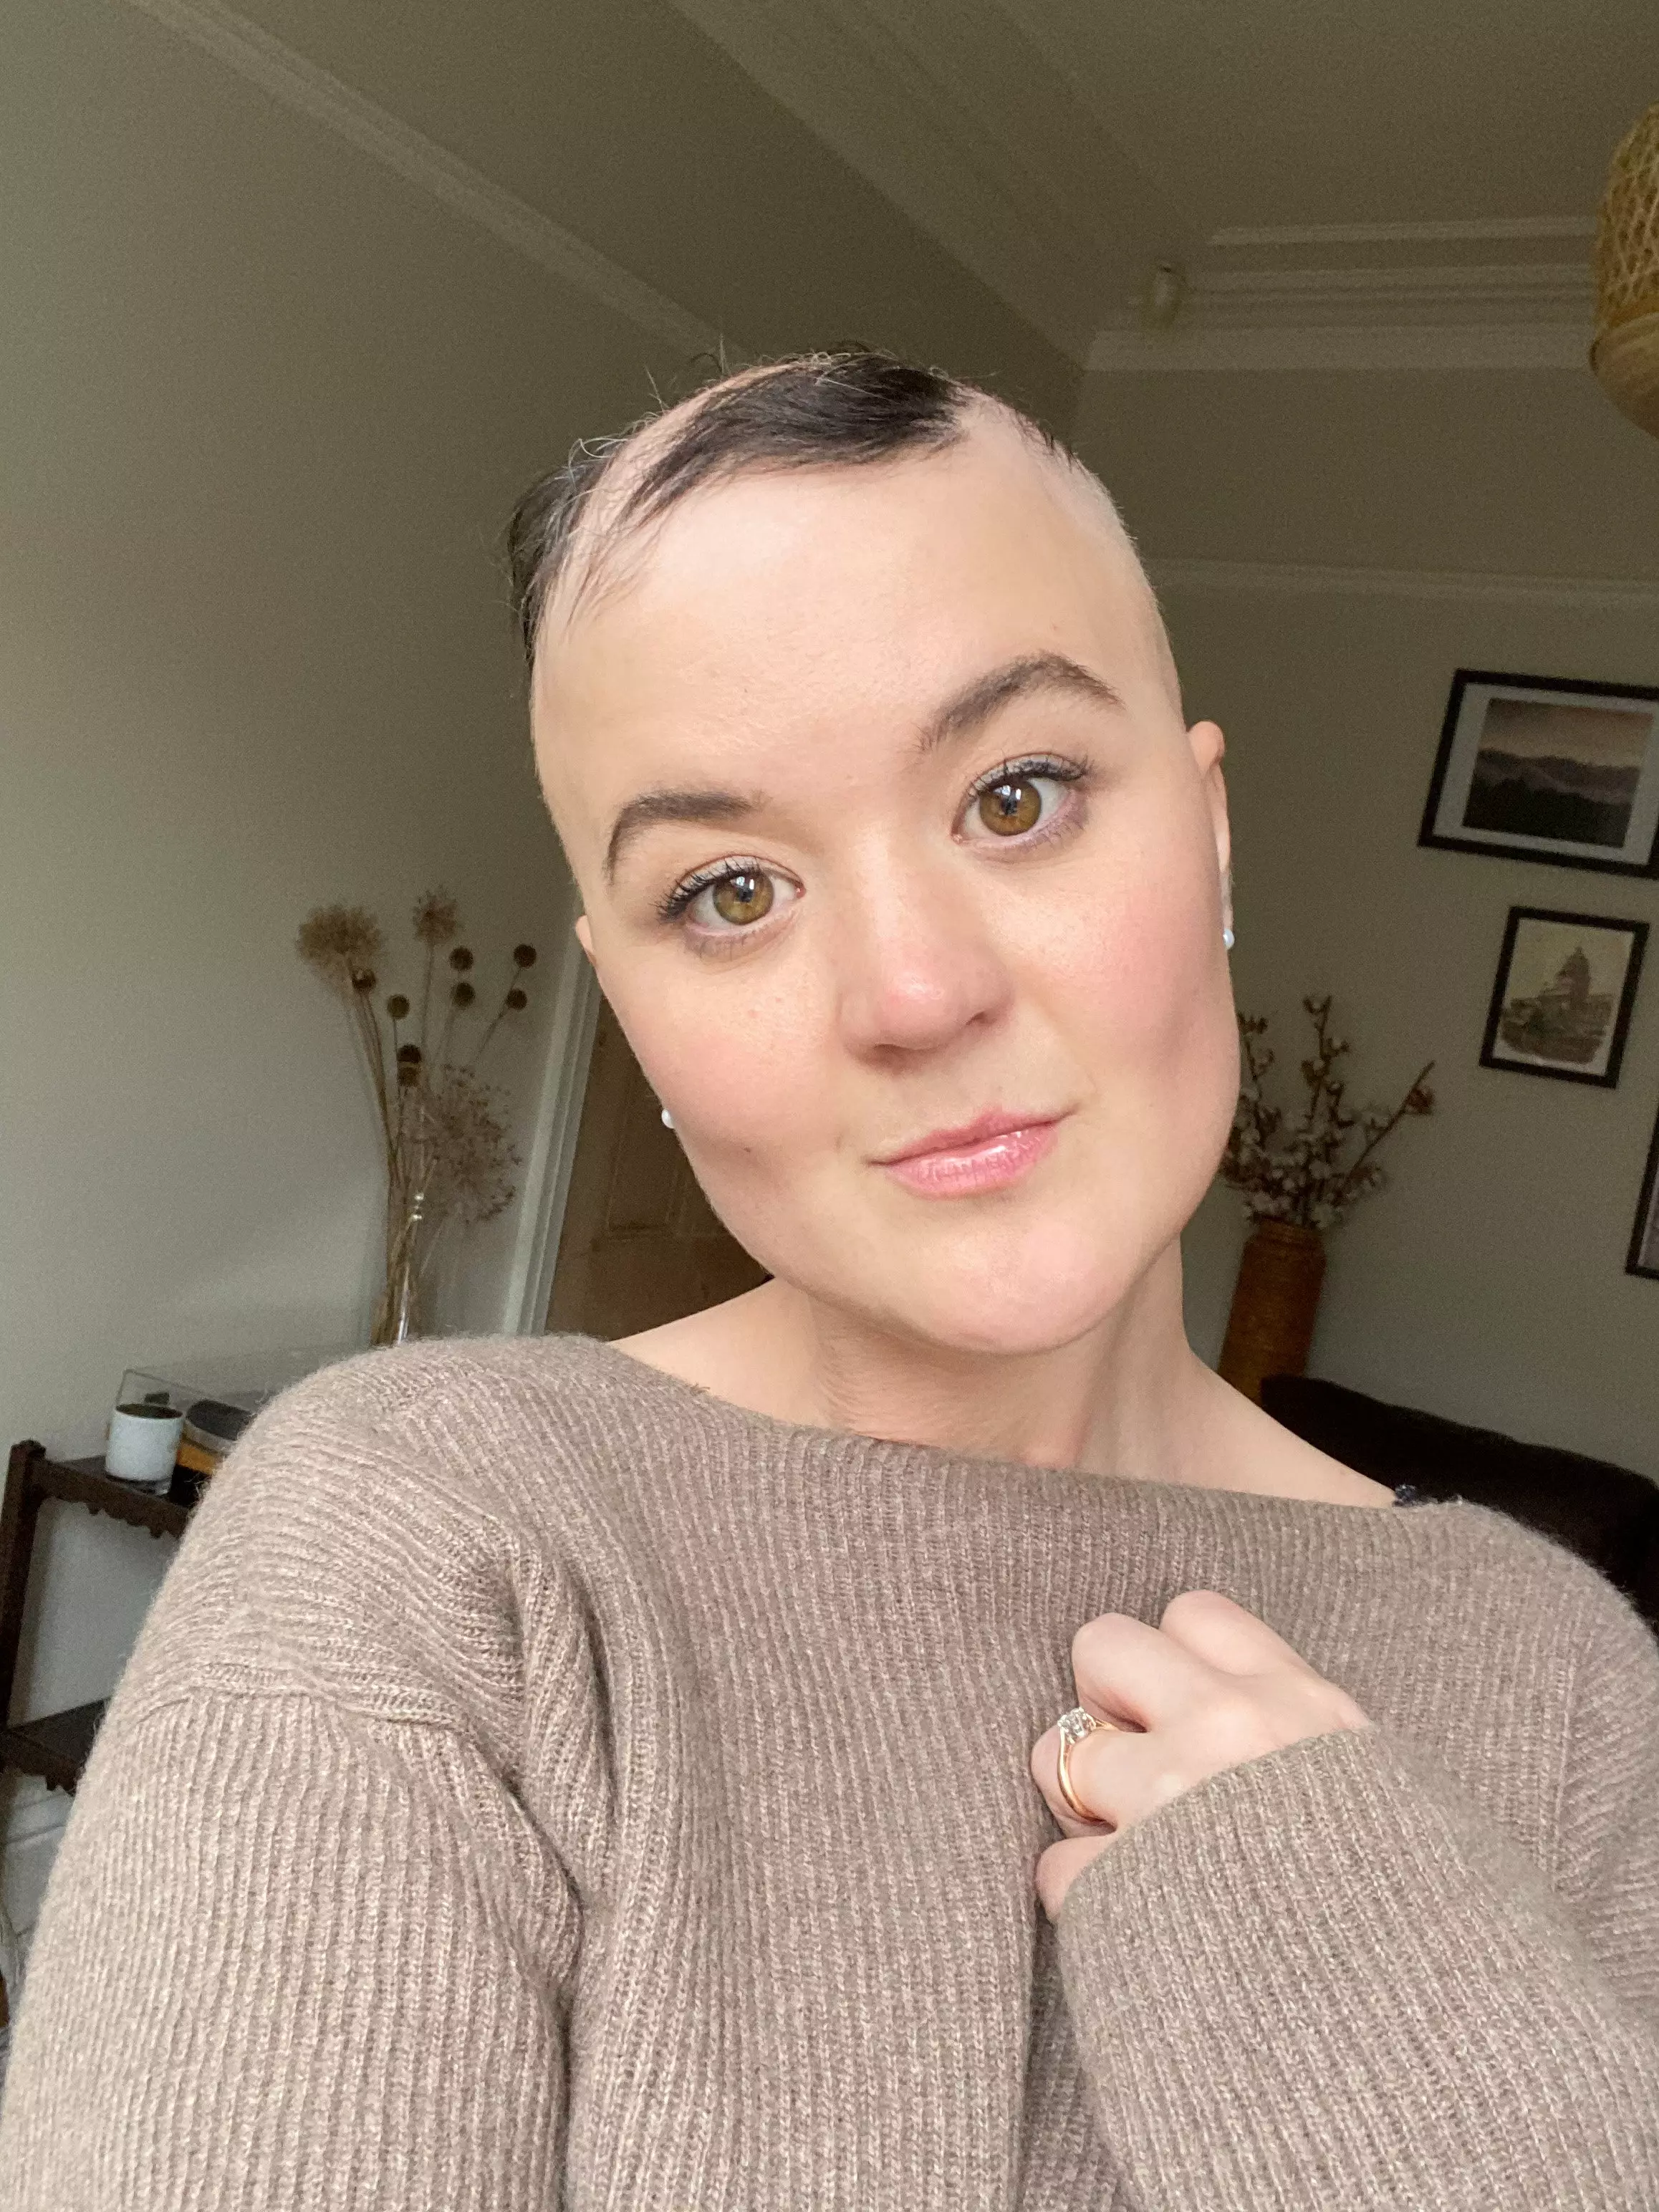 Hannah explained she was also shielding due to immunosuppressing medication taken to treat her alopecia (